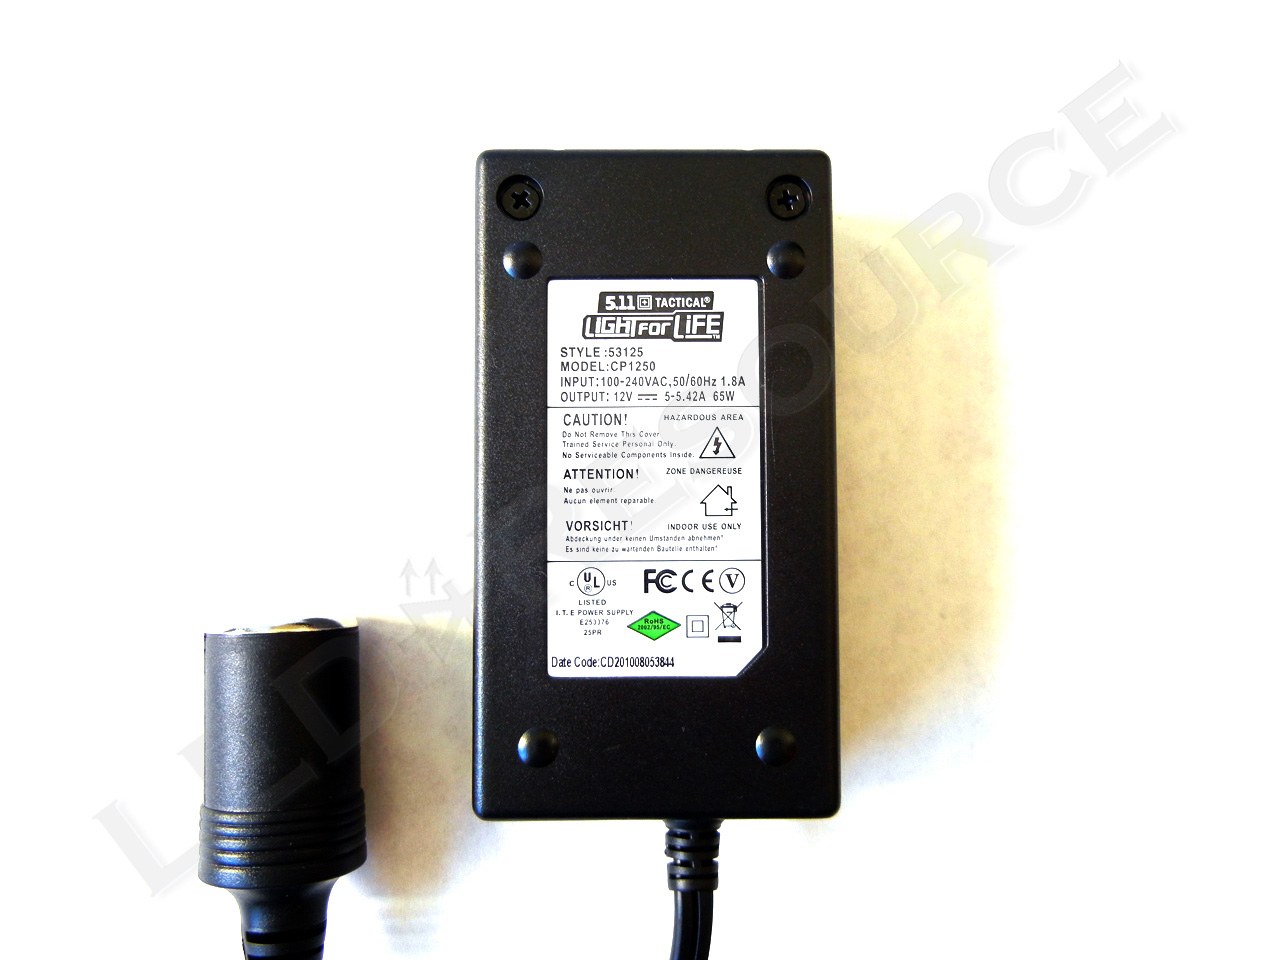 AC Adapter+Cord For 5.11 TACTICAL 53125 CP1250 LIGHT For LIFE PC3.300 UC3.400 